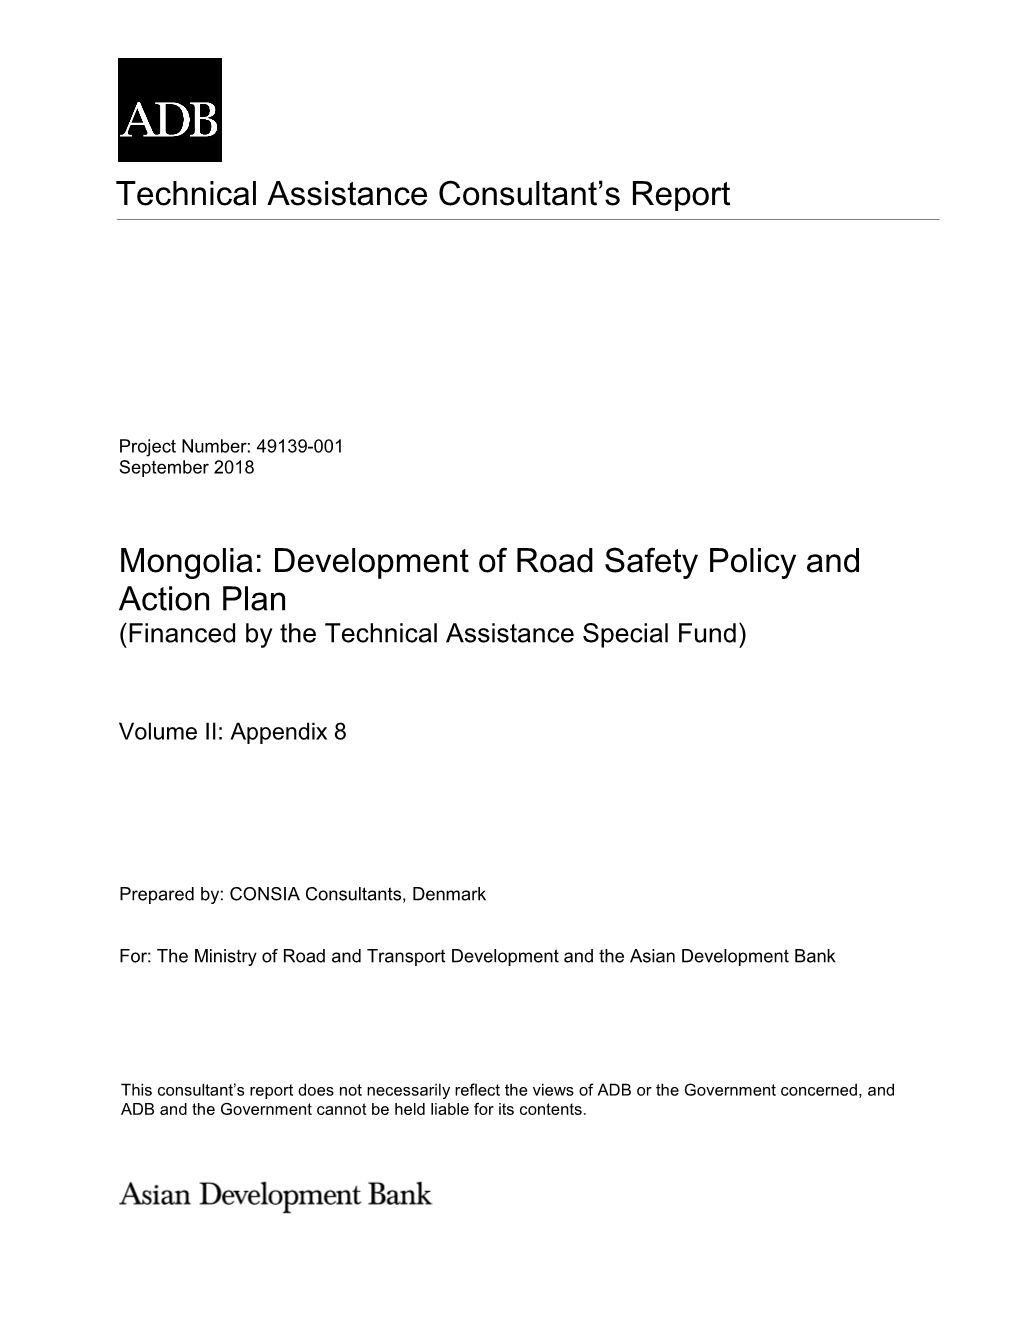 49139-001: Development of Road Safety Policy and Action Plan